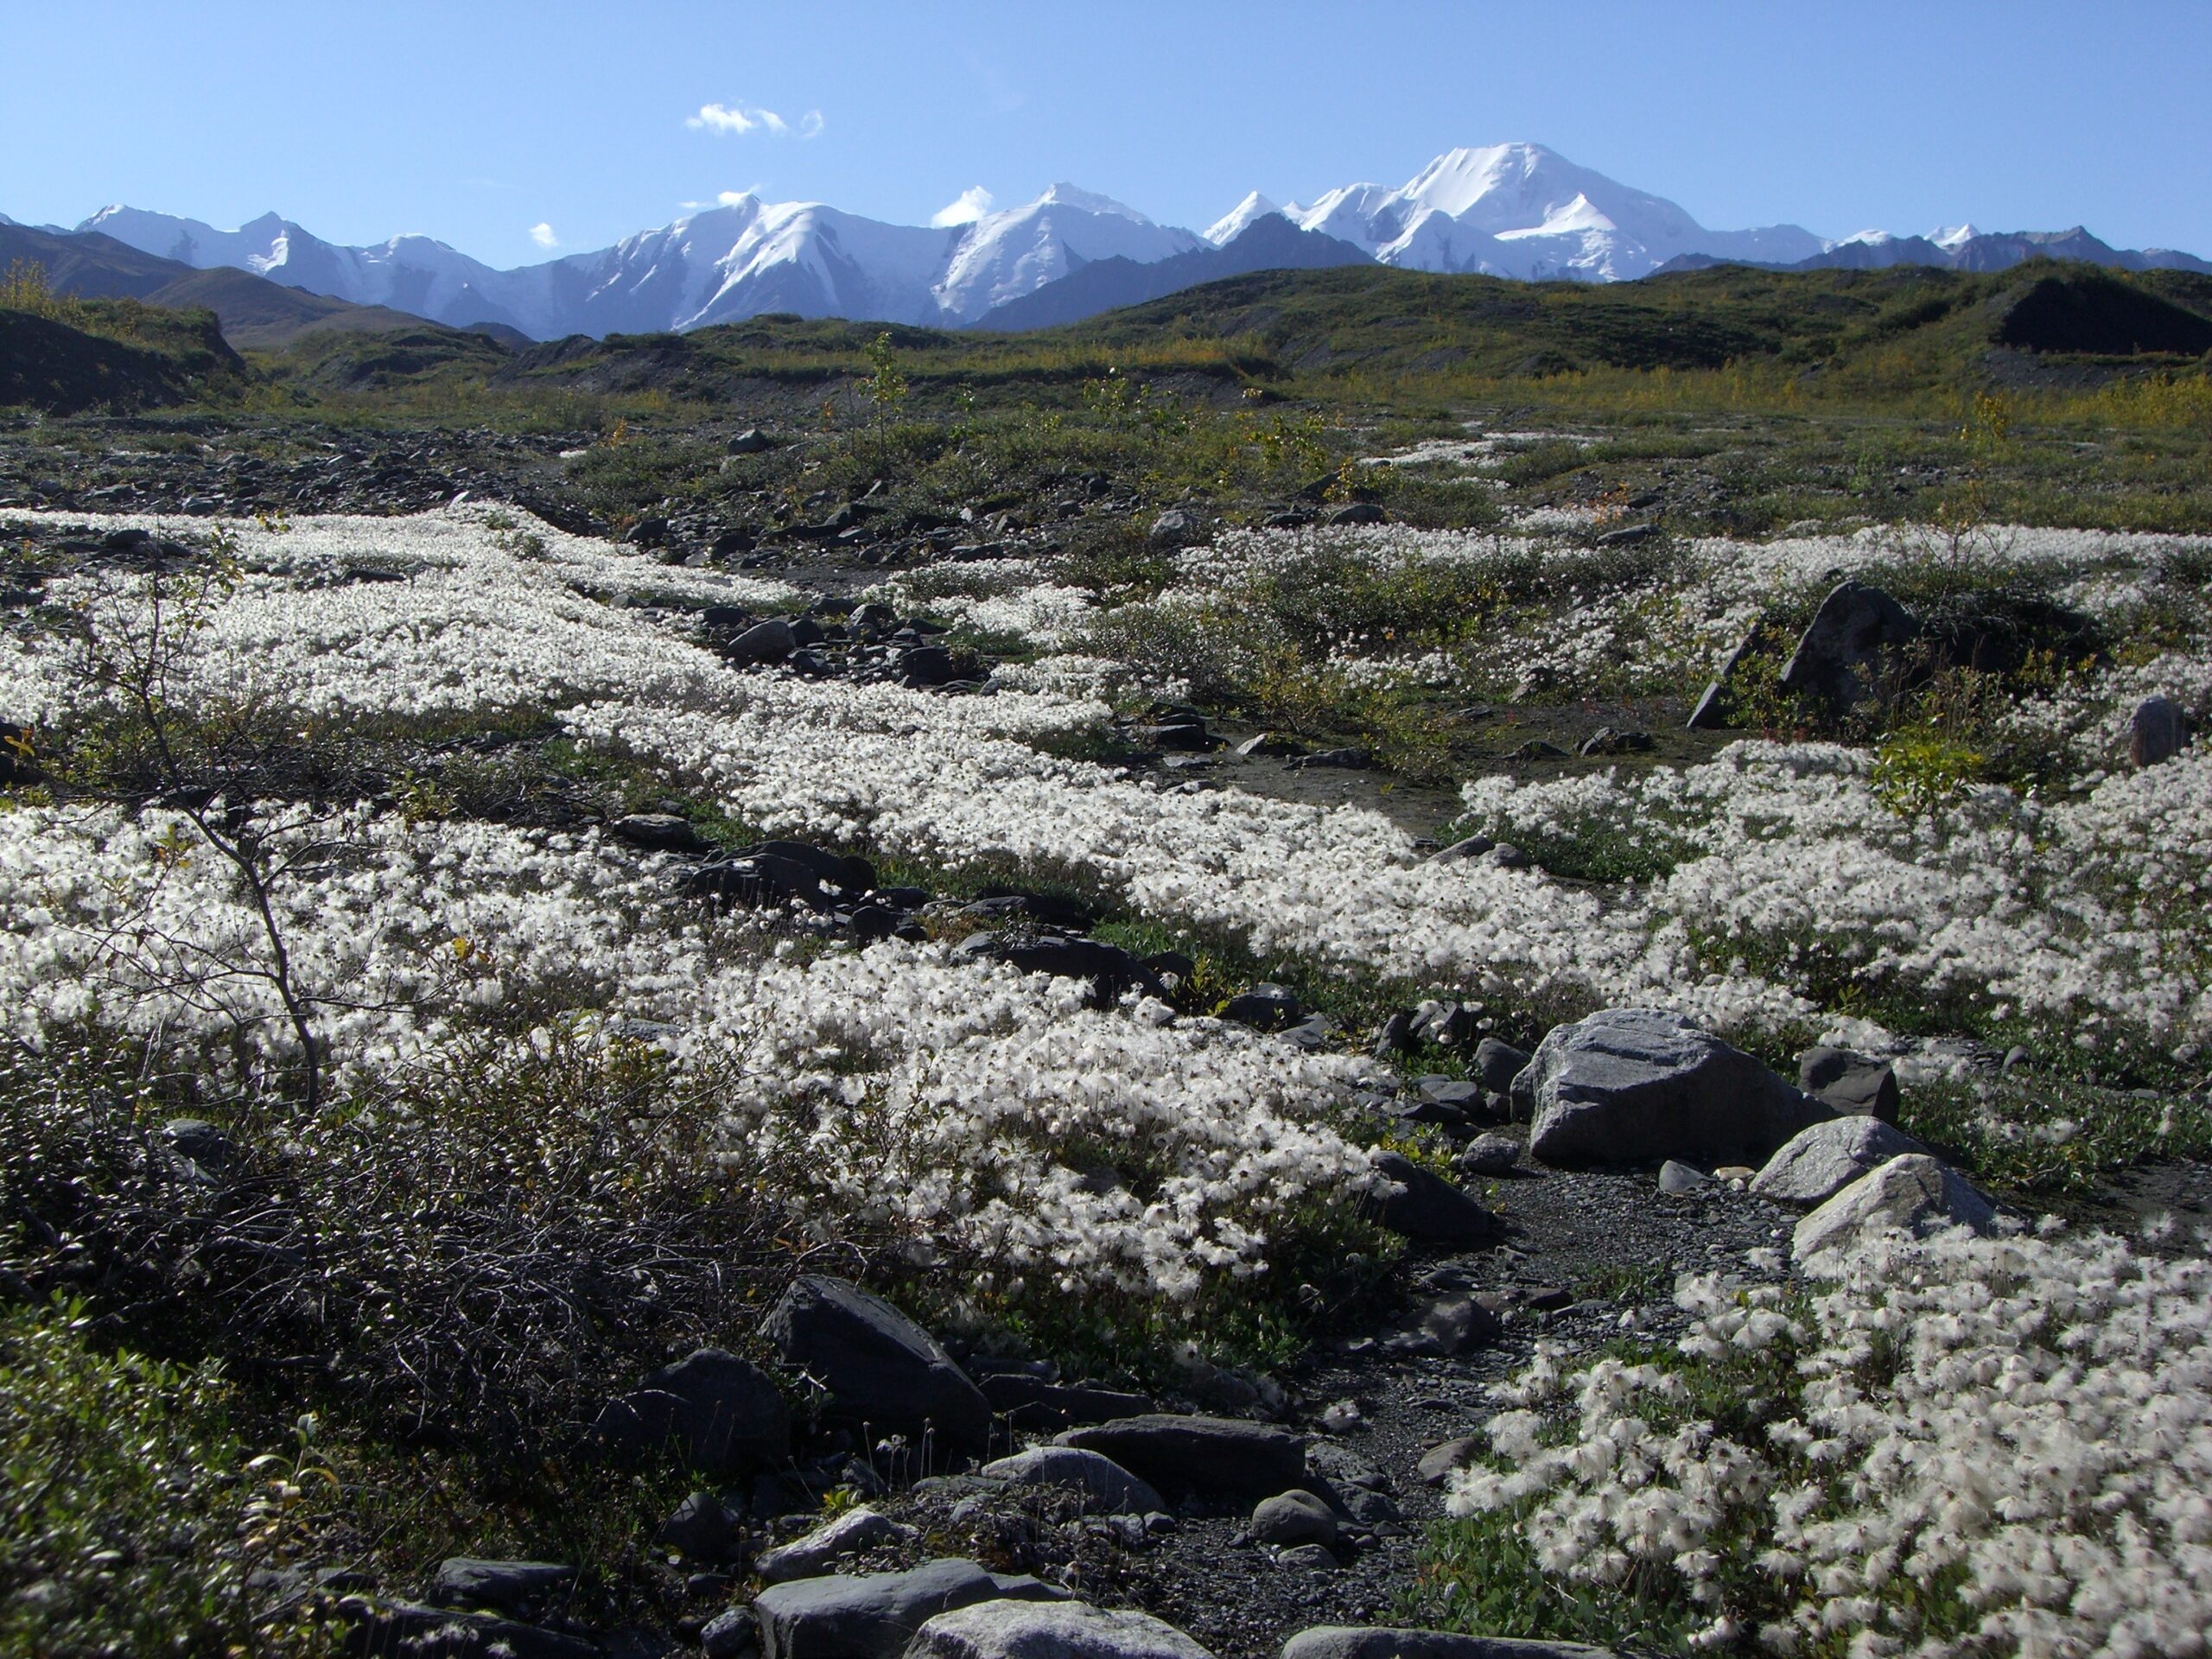 Fields of flowers pave the way back to the Denali Park road.